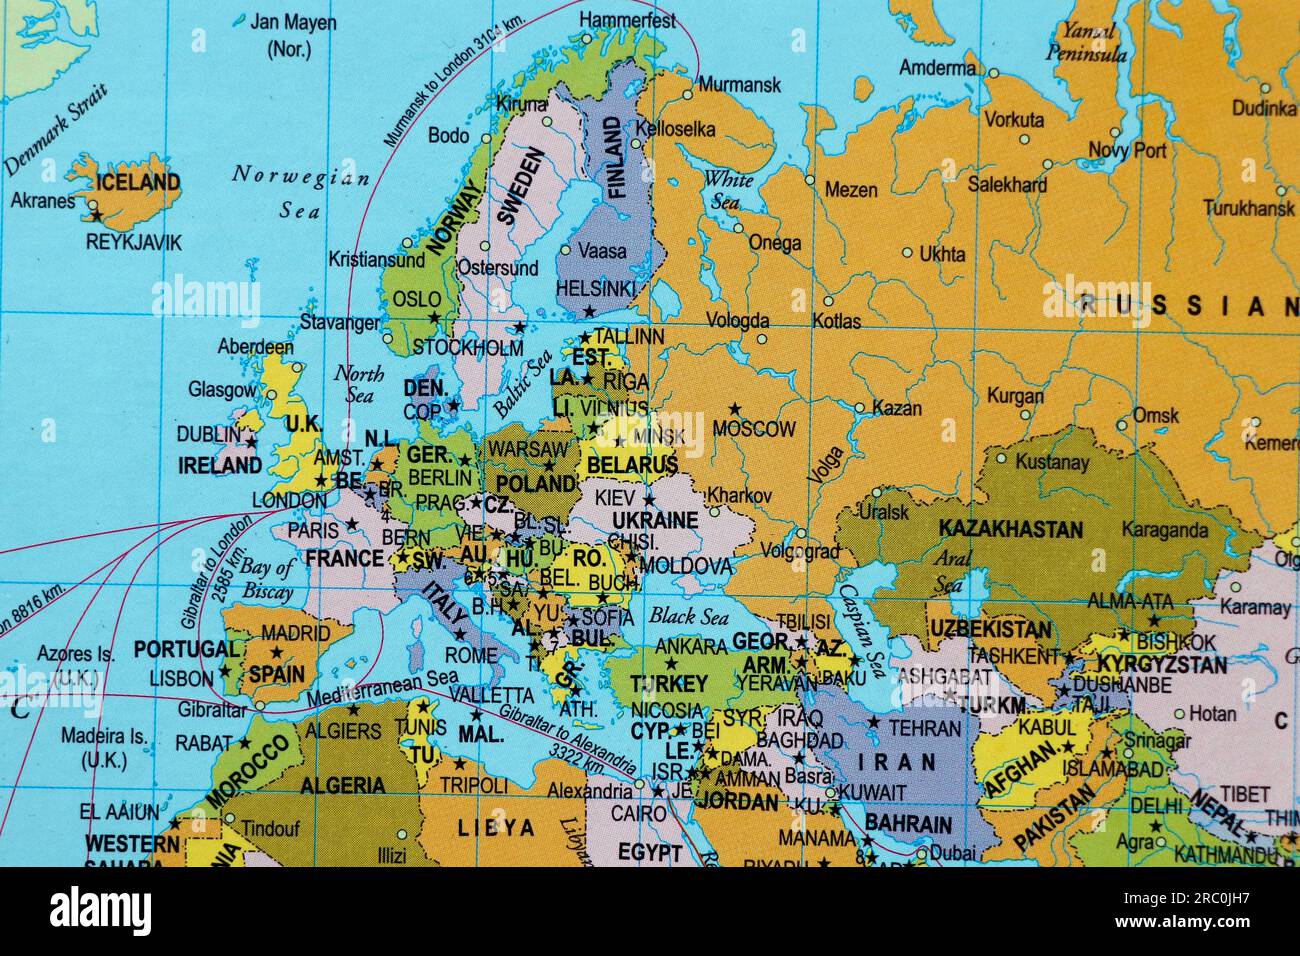 world-map-with-europe-continent-countries-and-oceans-stock-photo-alamy